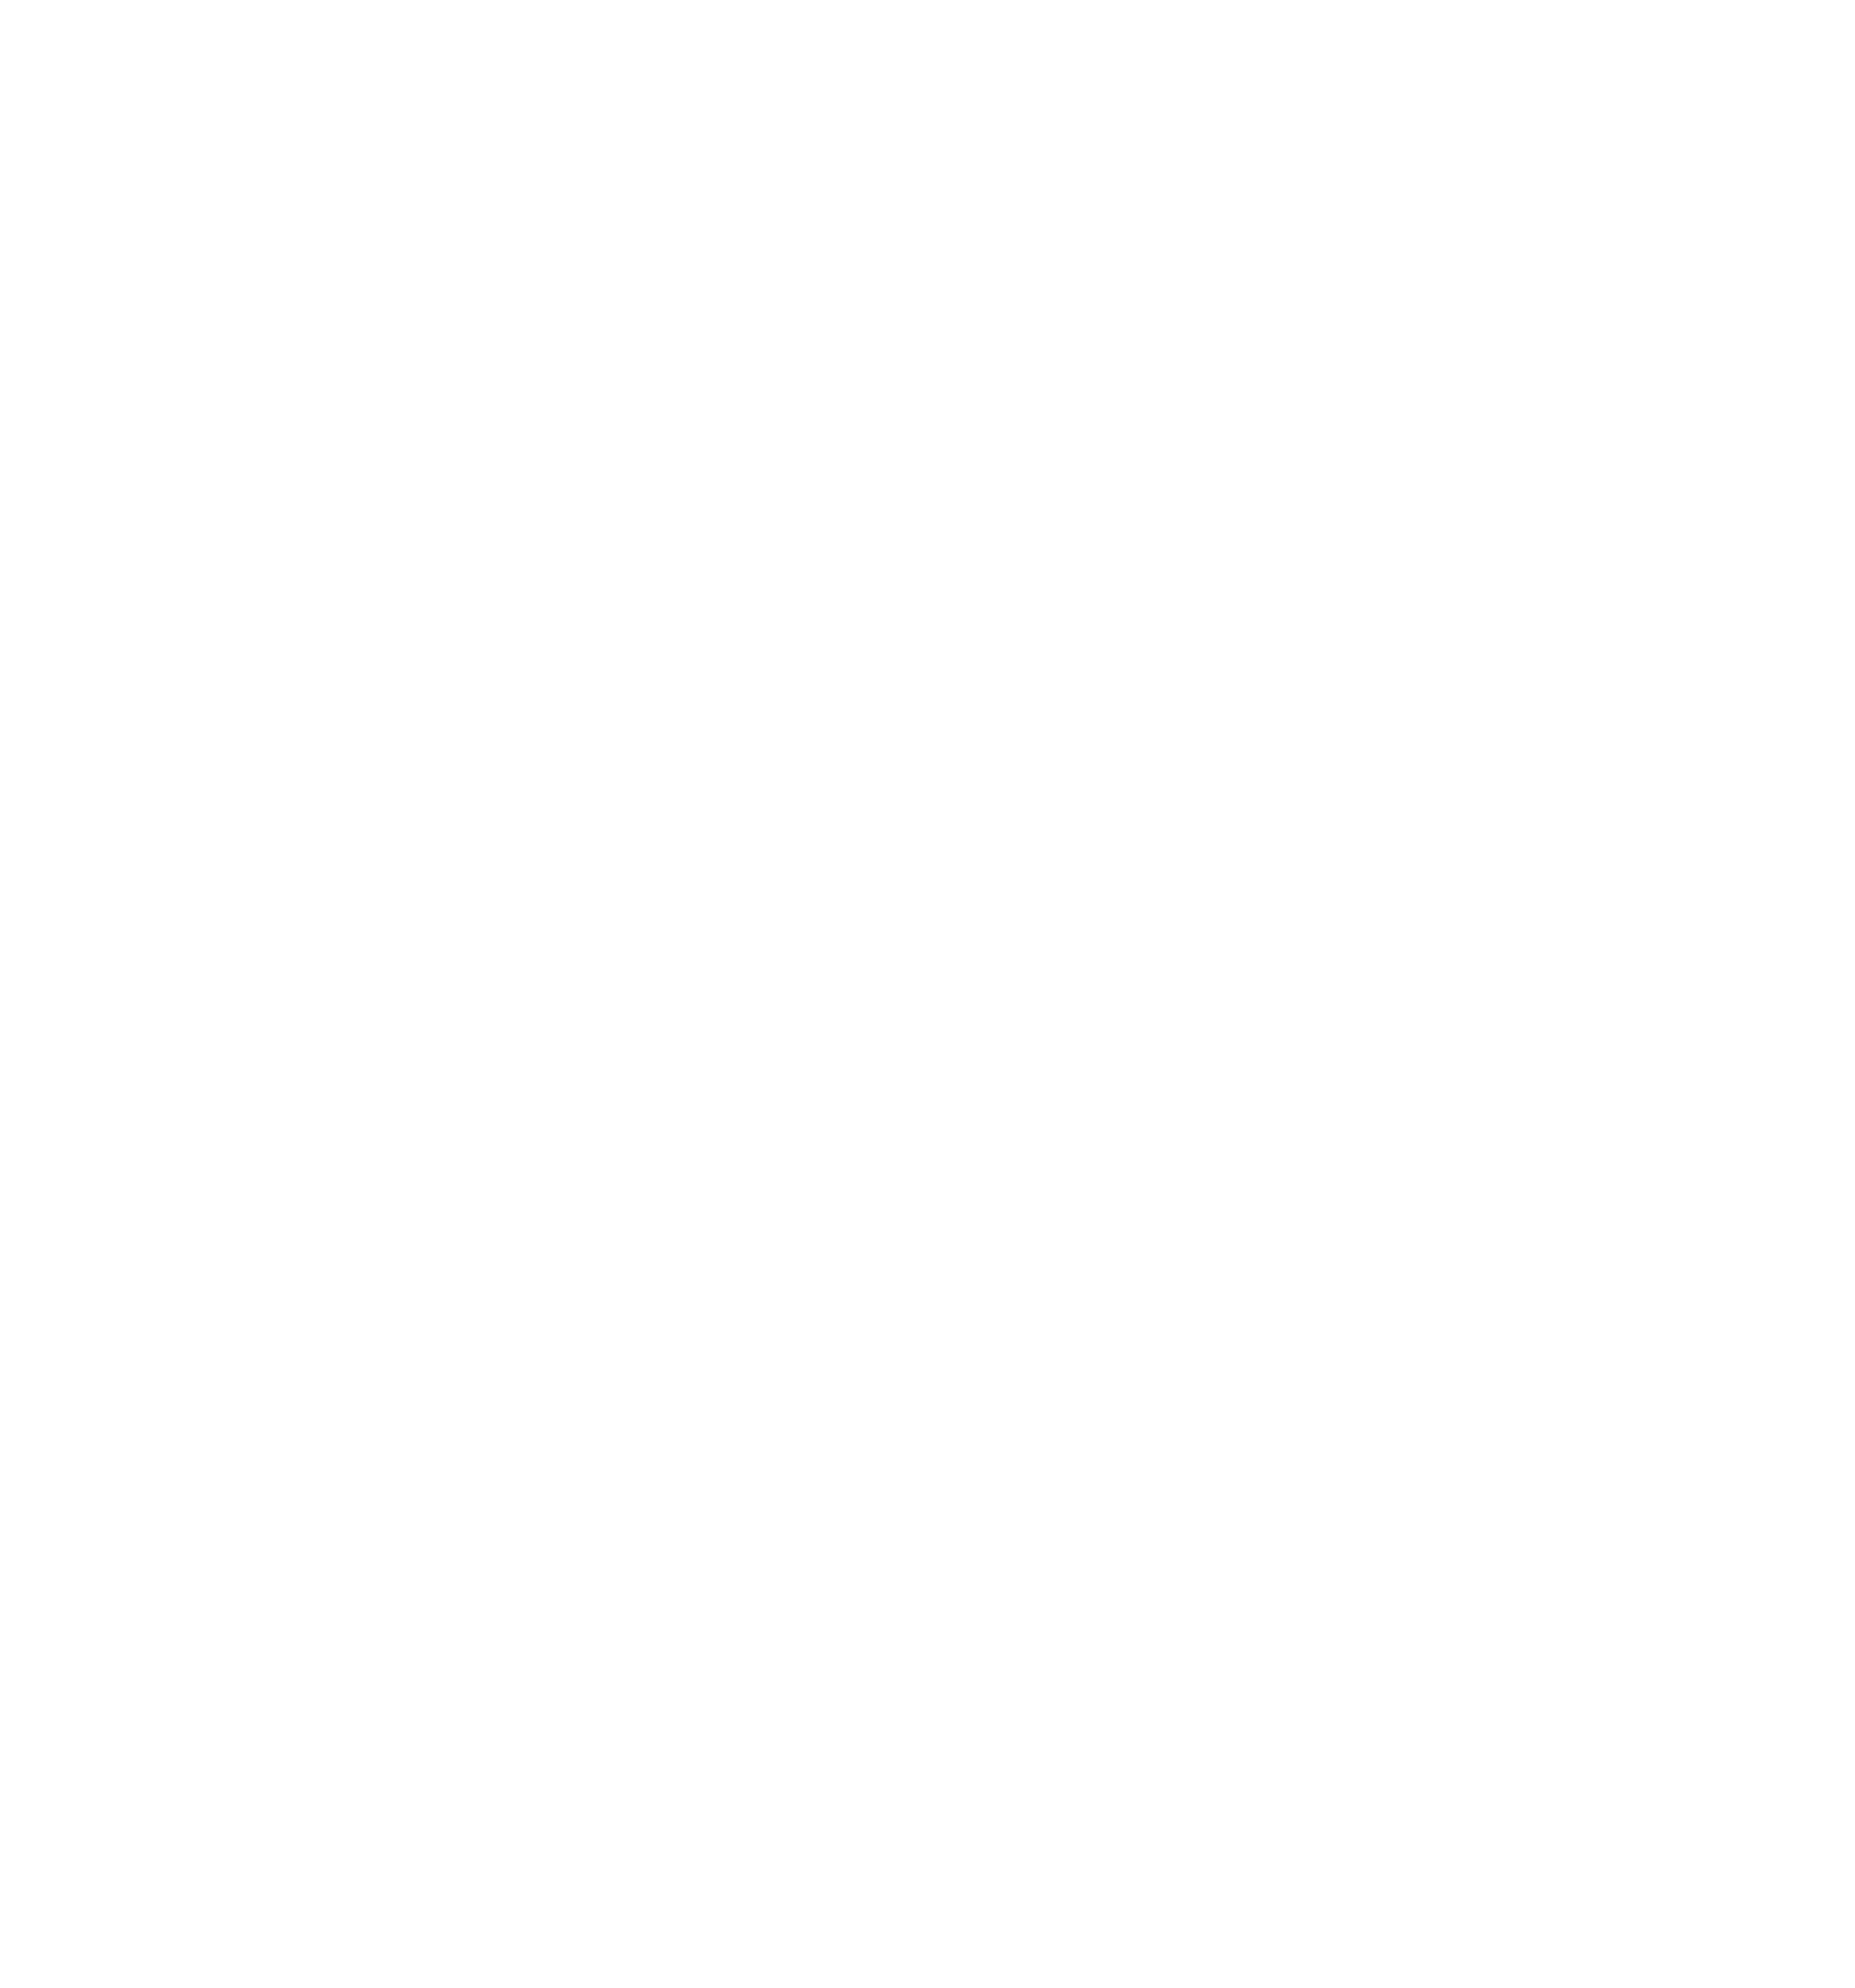 isiko